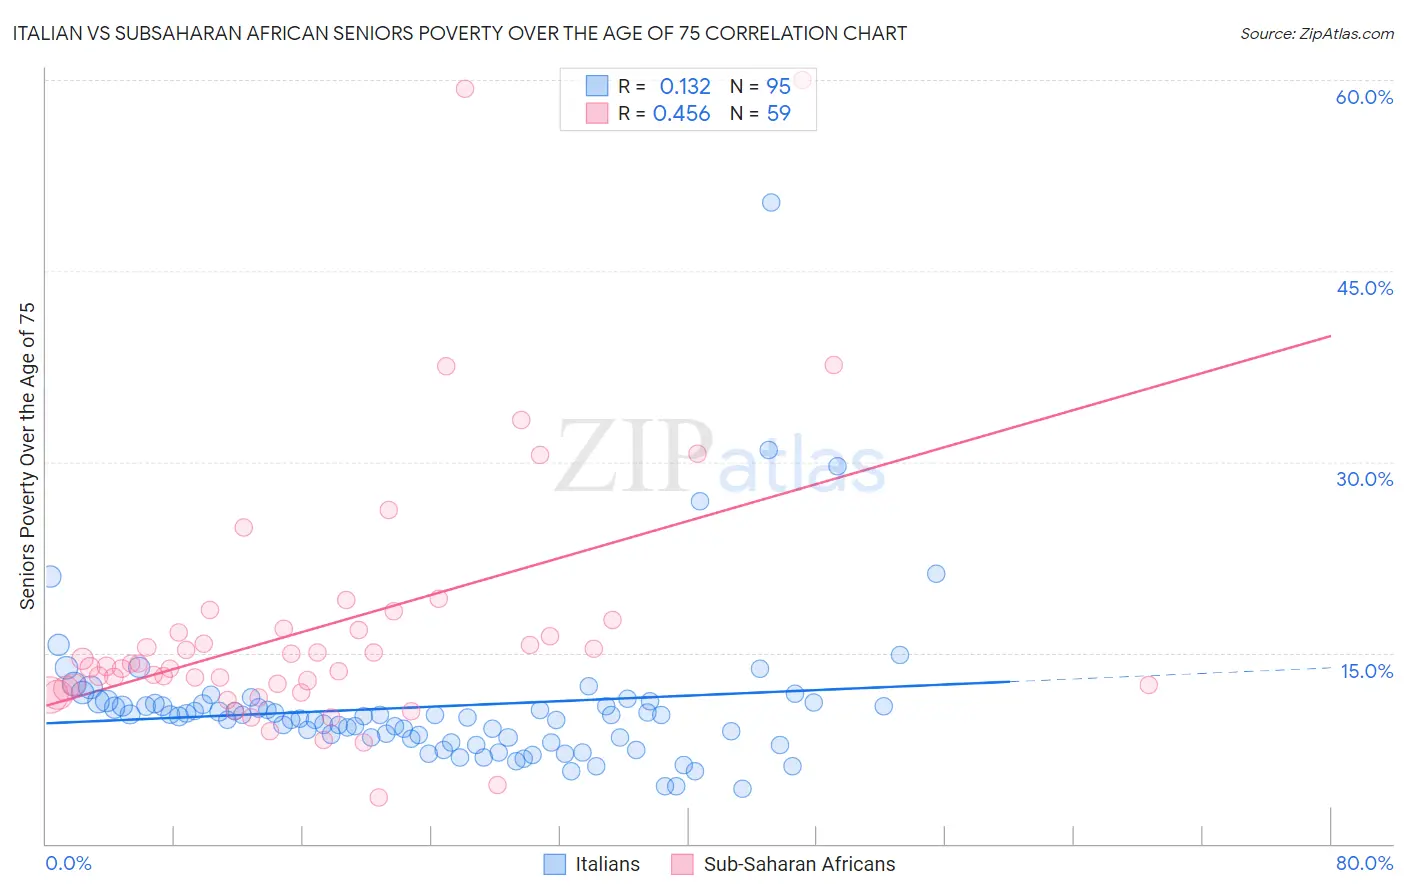 Italian vs Subsaharan African Seniors Poverty Over the Age of 75